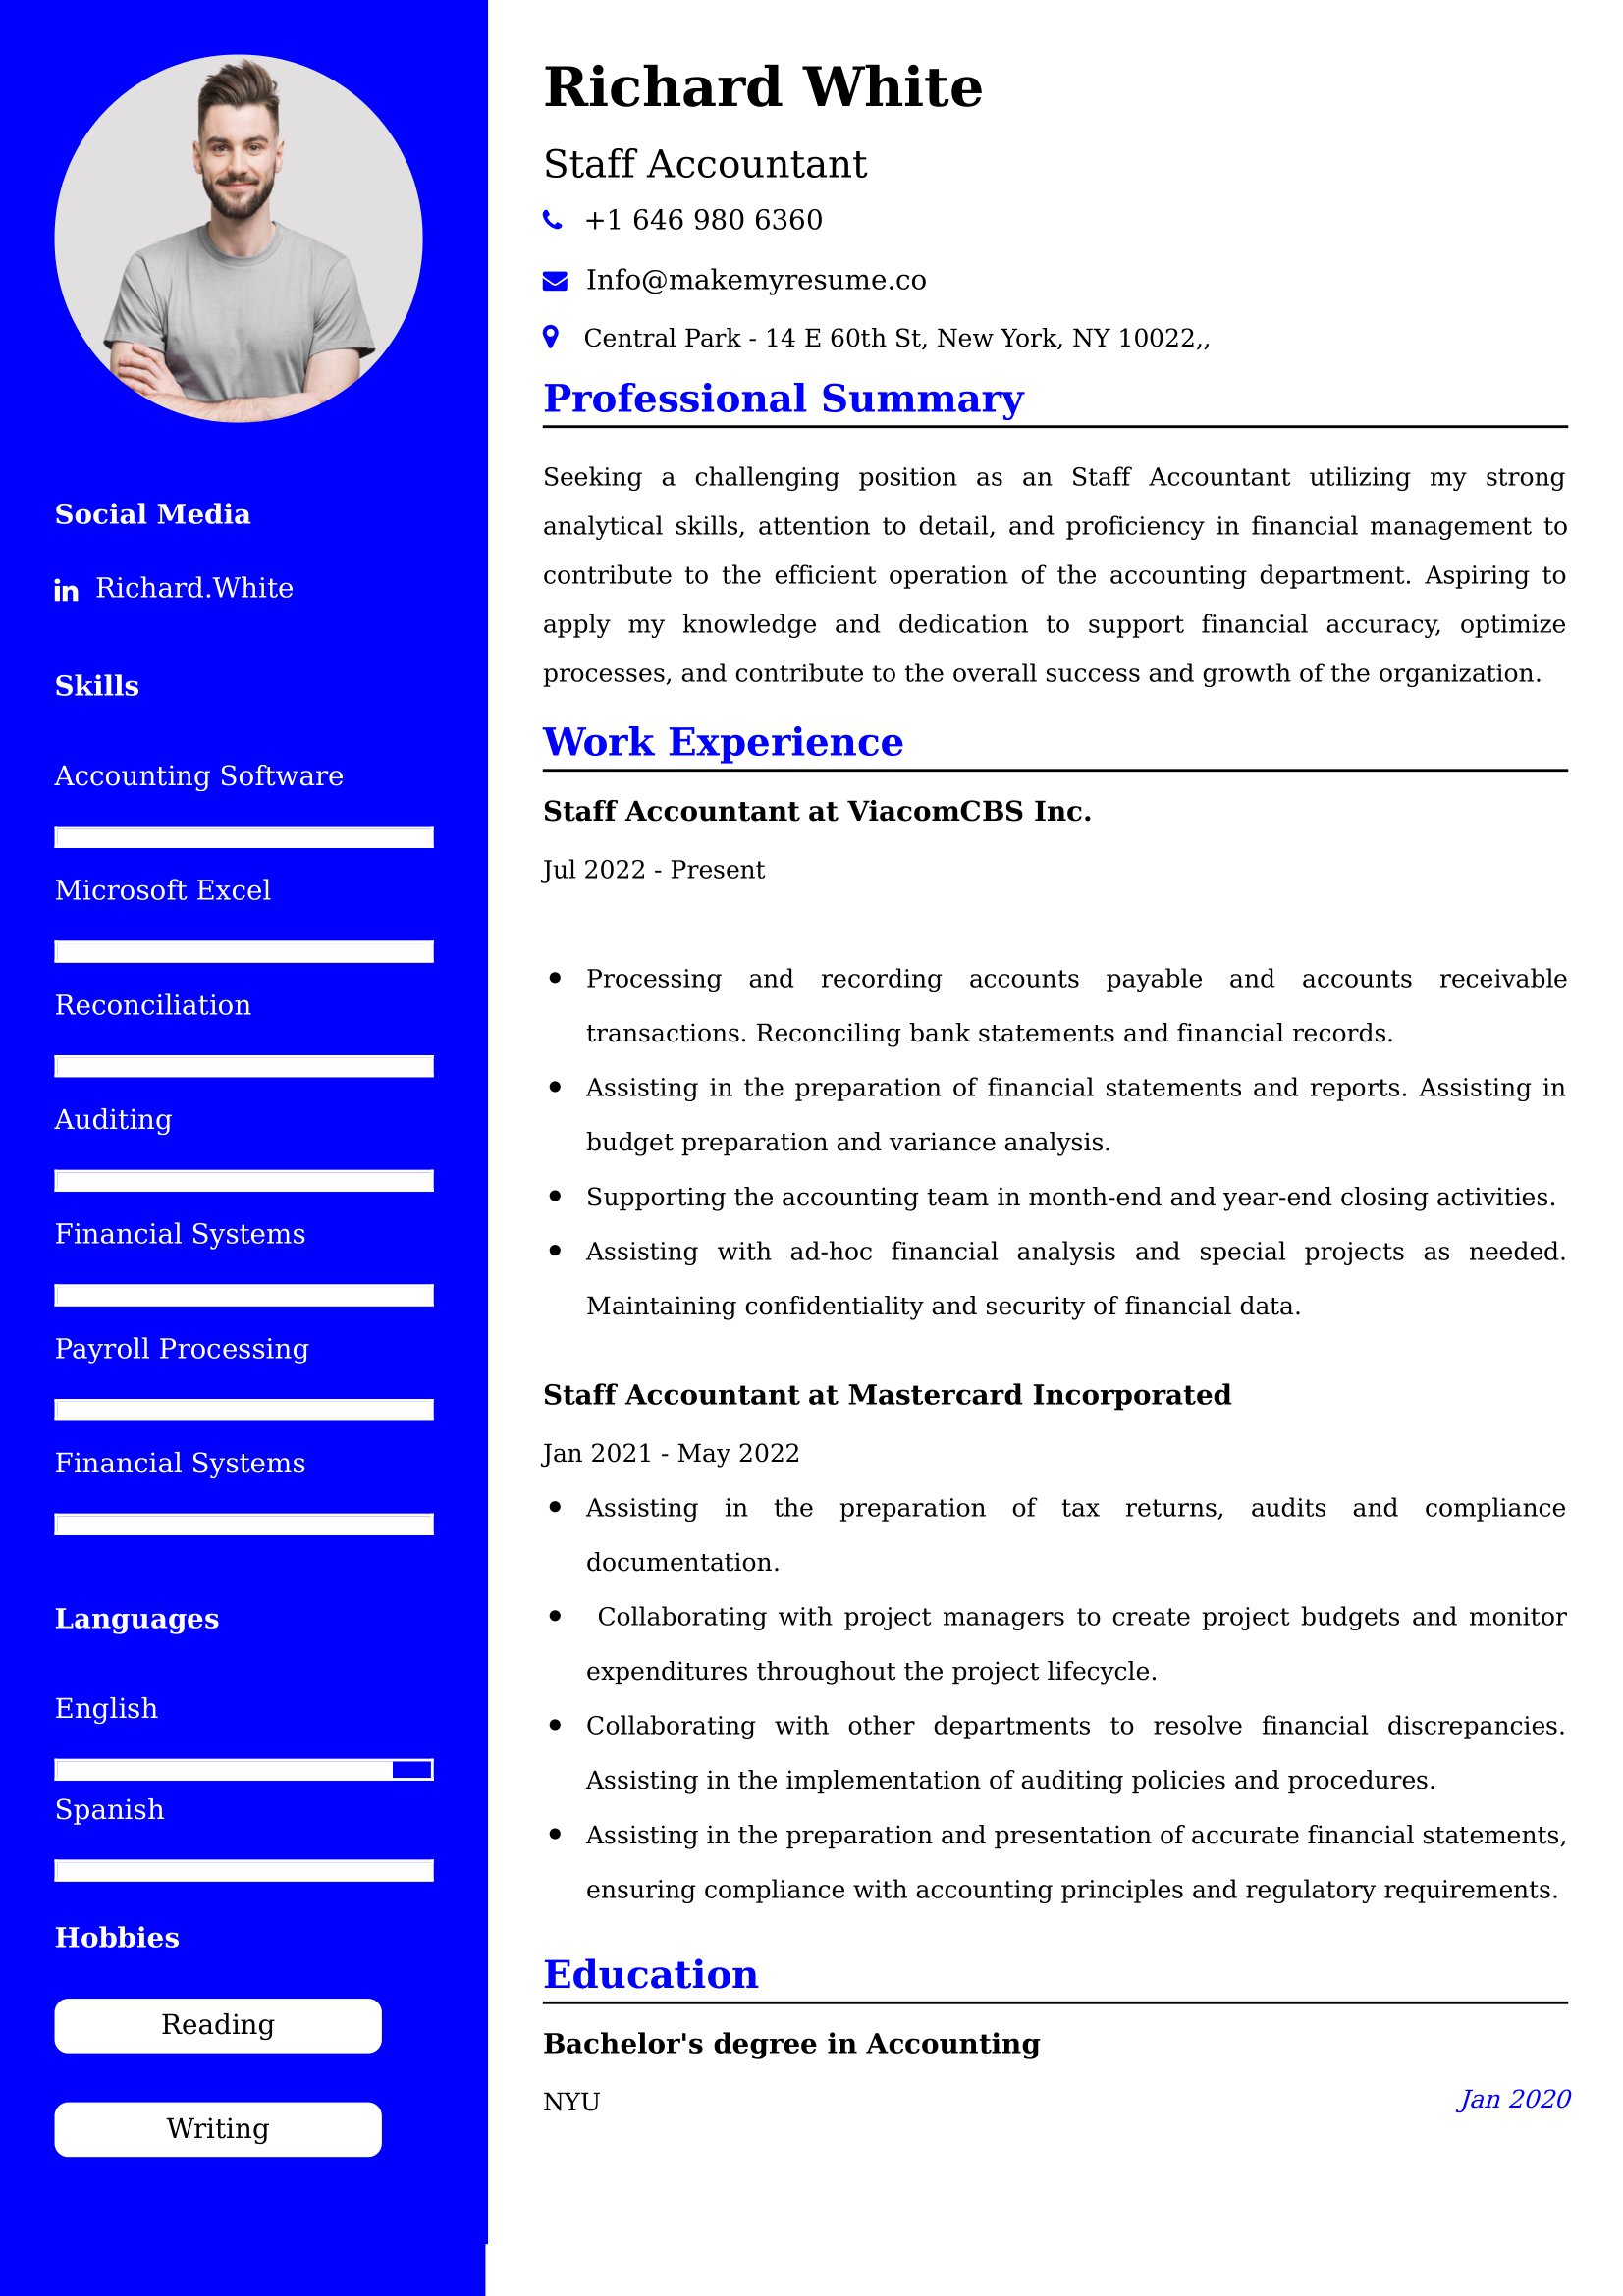 Staff Accountant Resume Examples - Brazilian Format, Latest Template